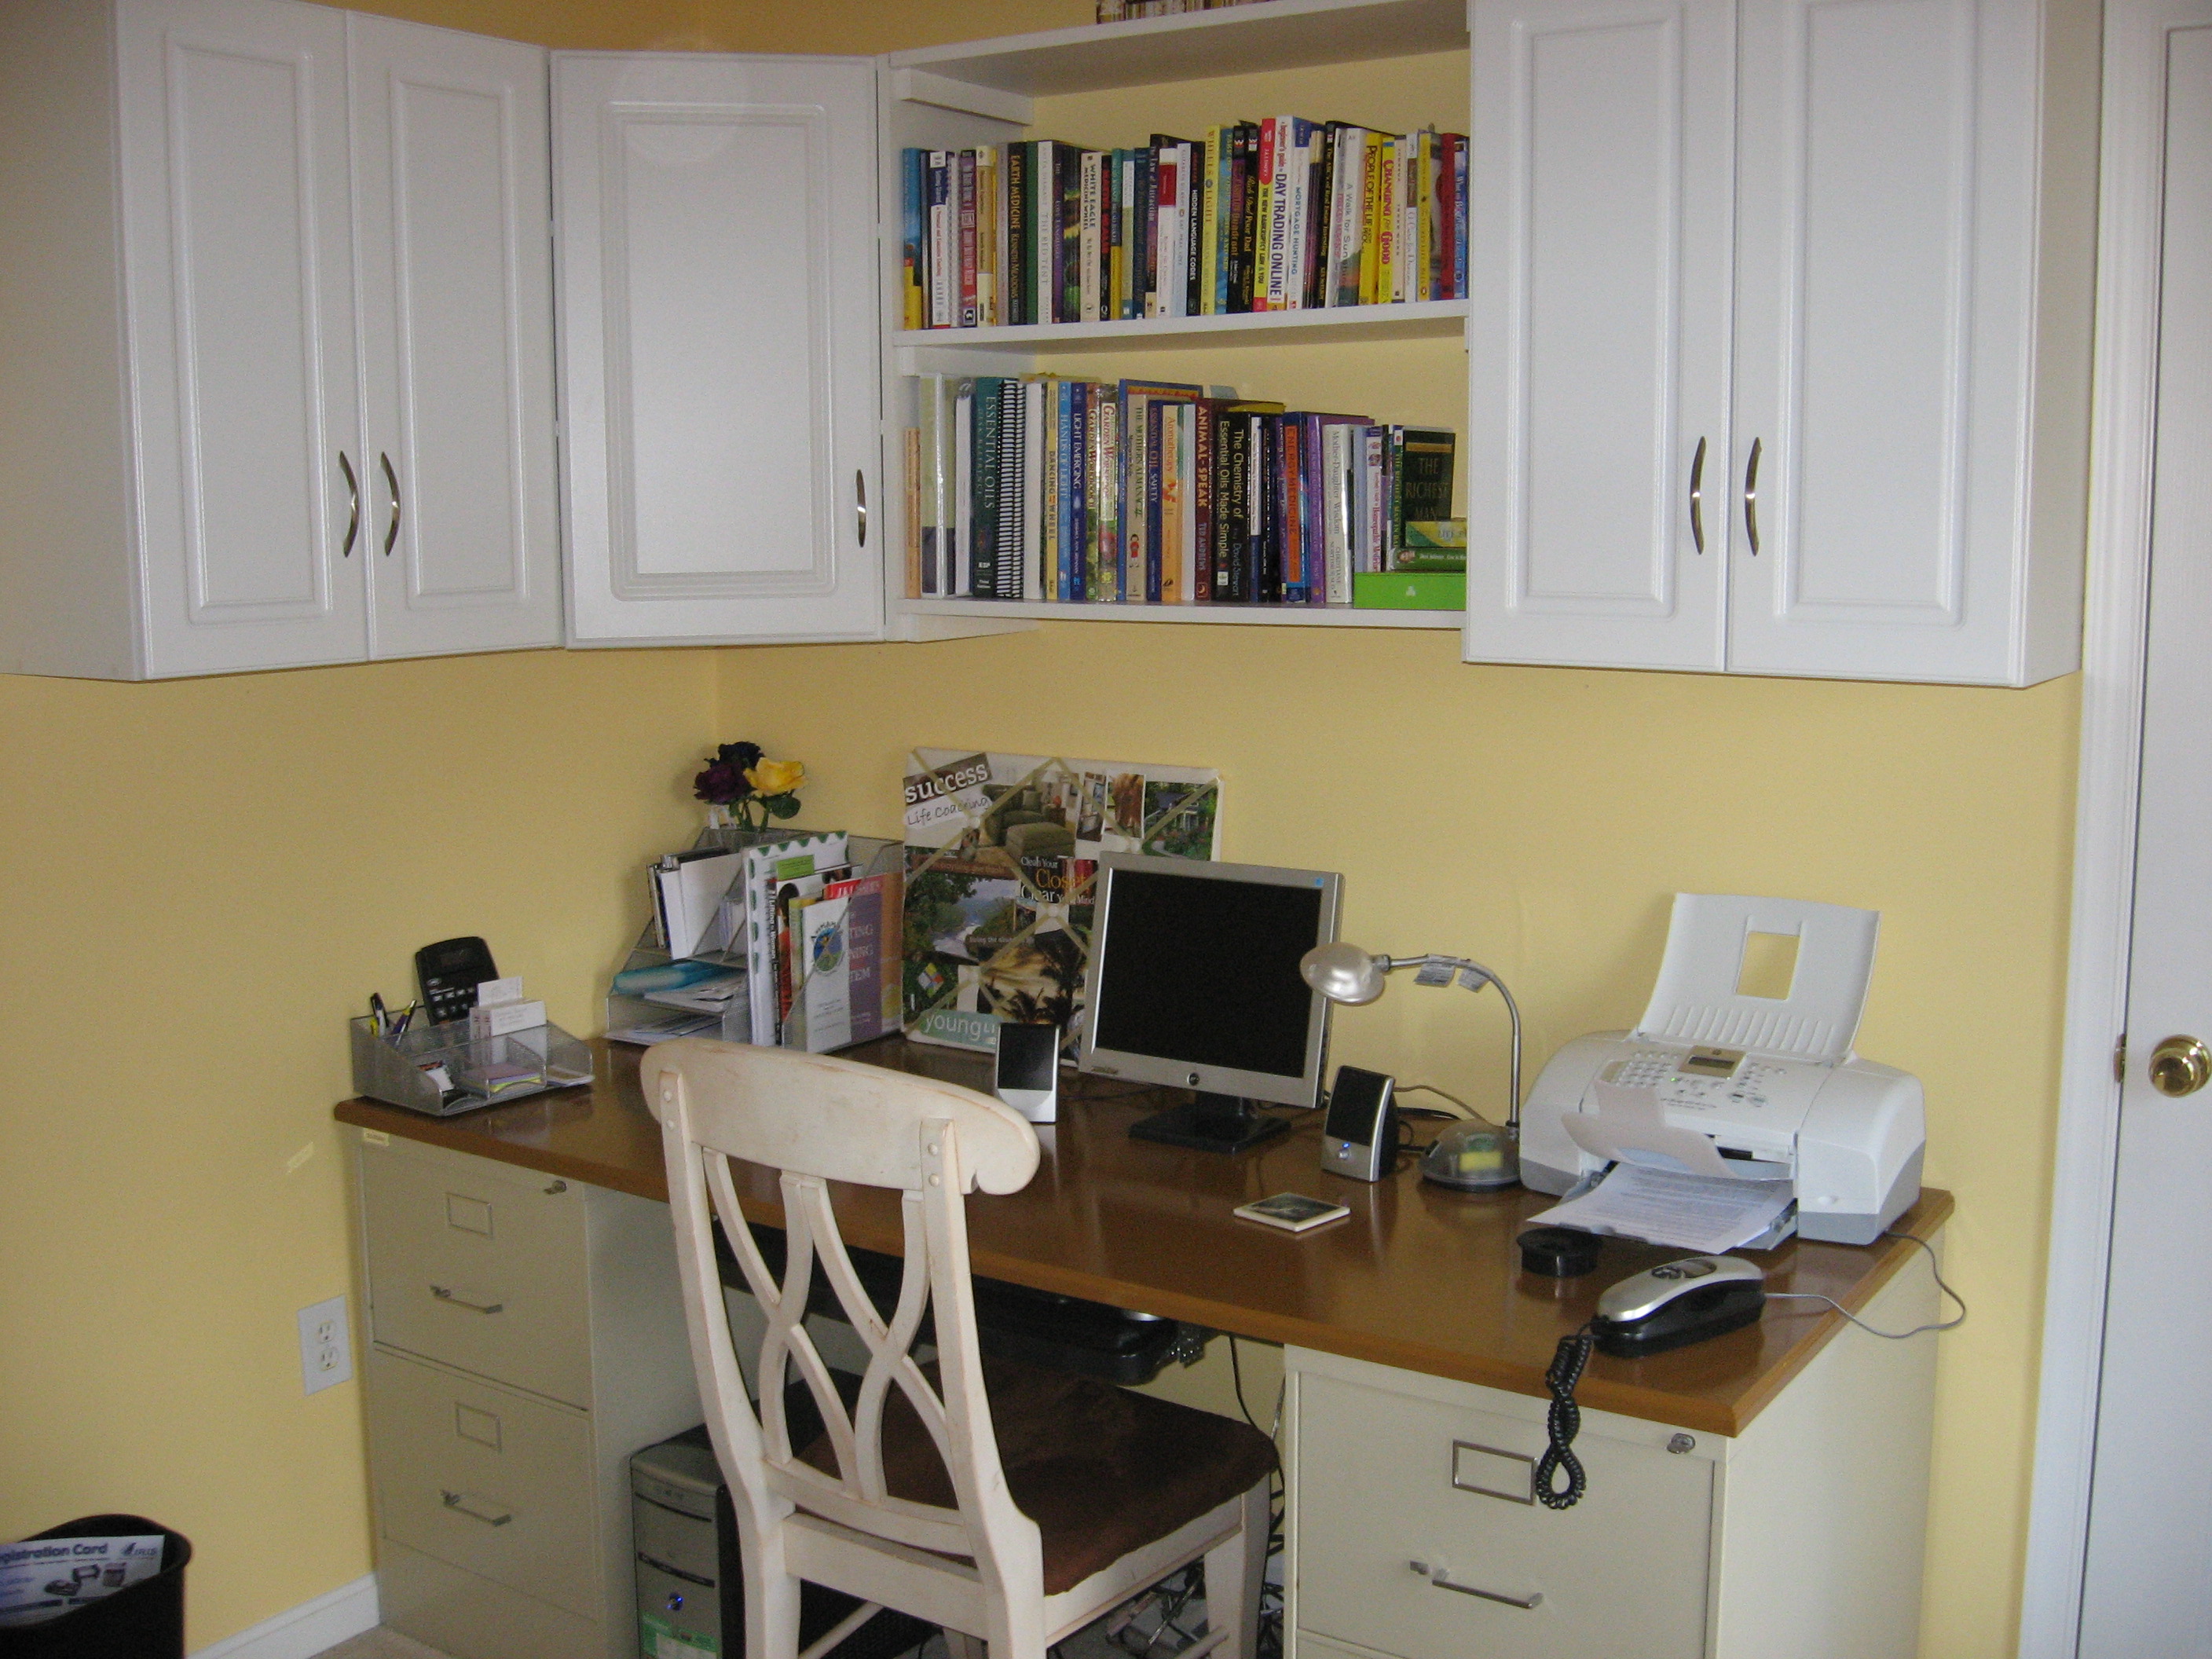 Does Your Home Office have a Vision Statement?